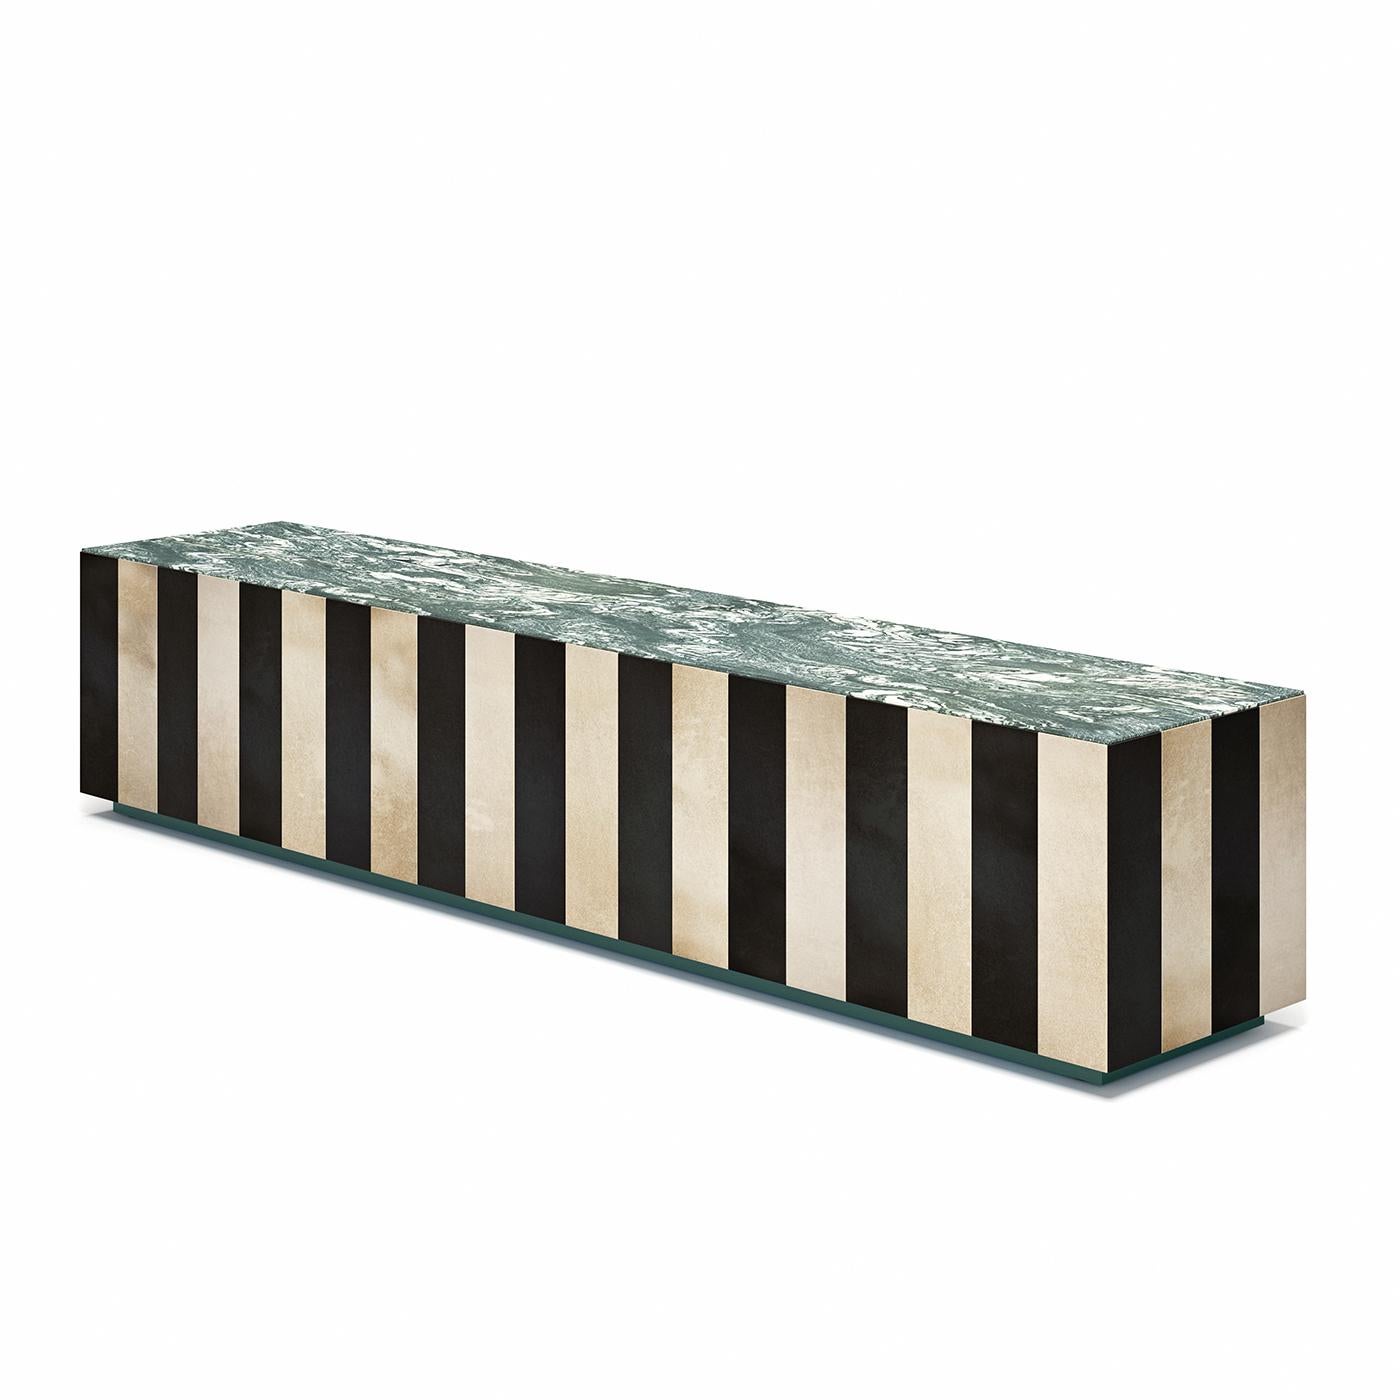 This superb coffee table merging sophisticated materials will take center stage in any decor with its captivating aesthetic. The design comprises an exclusive top in Cipollino marble topping the inner wooden frame, which sits on a base lacquered in